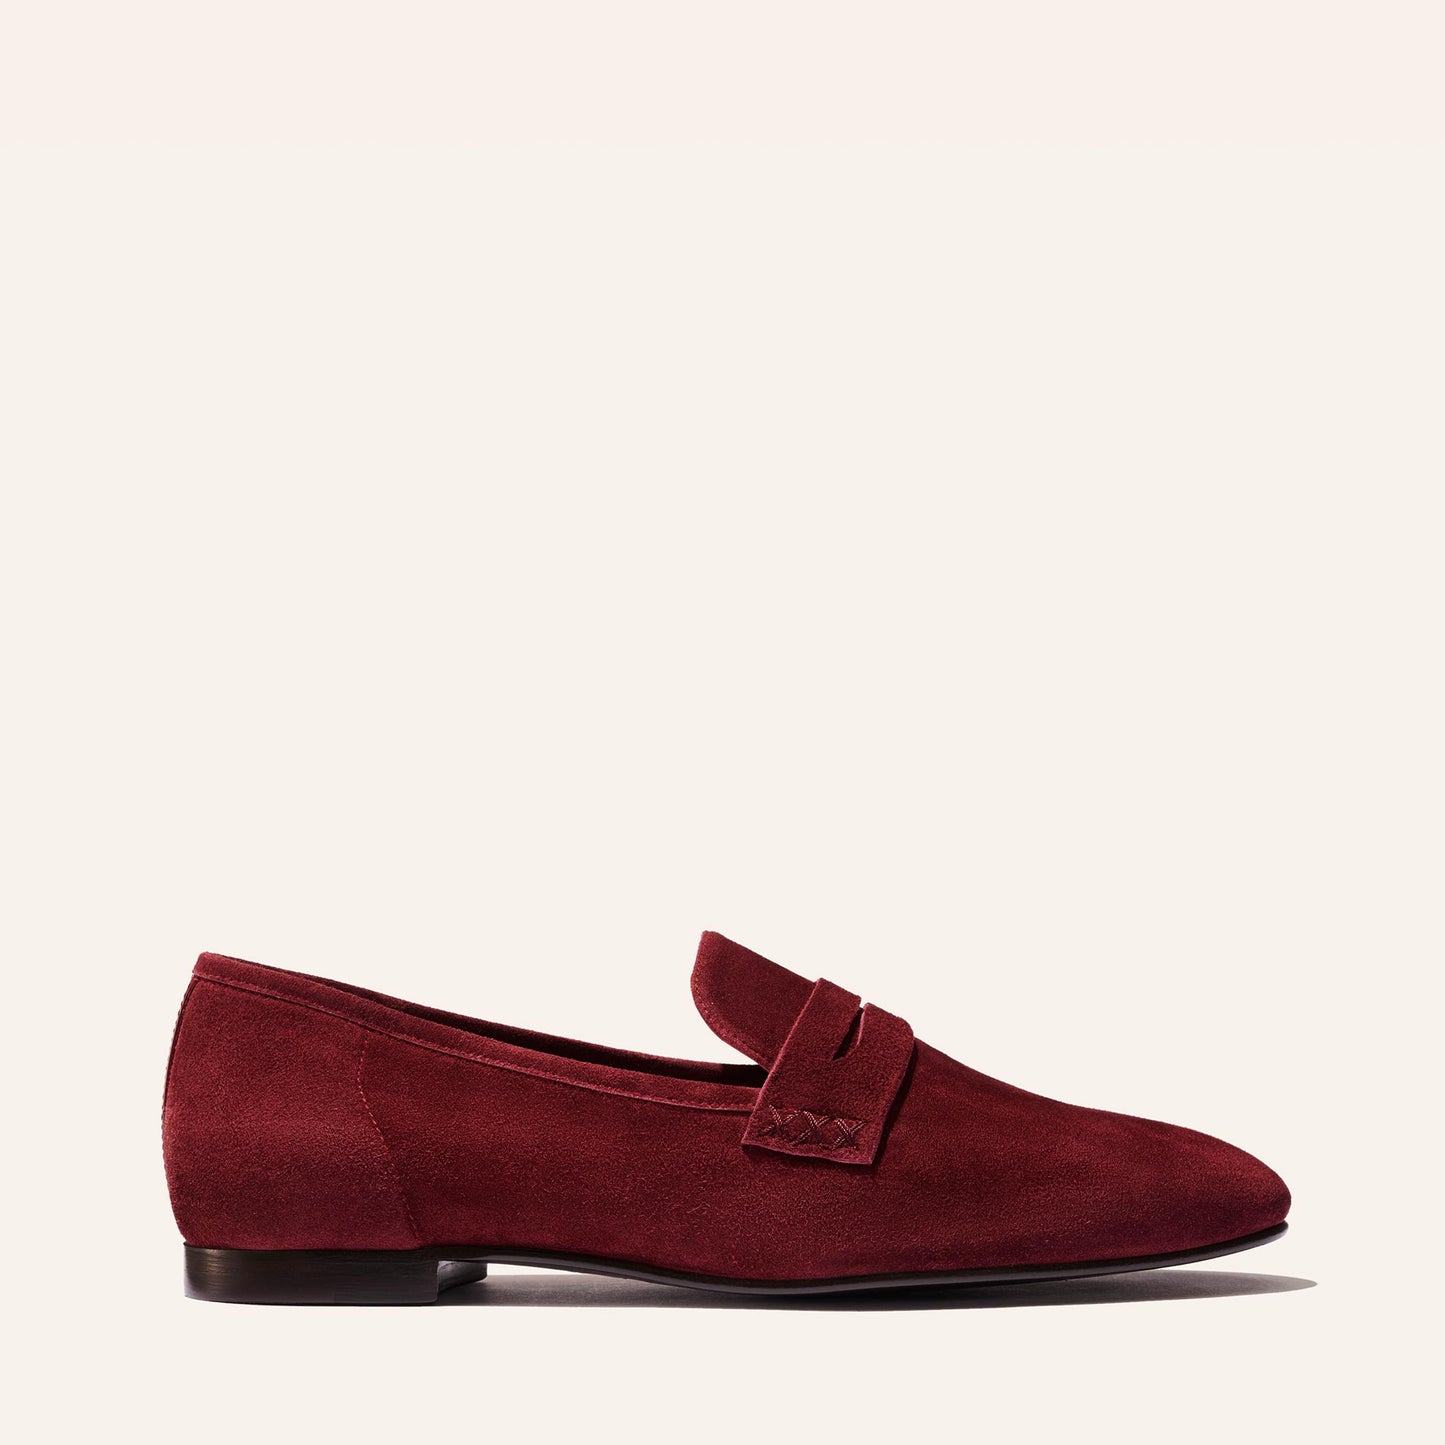 Margaux's classic and comfortable Penny loafer, made in a deep garnet Italian suede